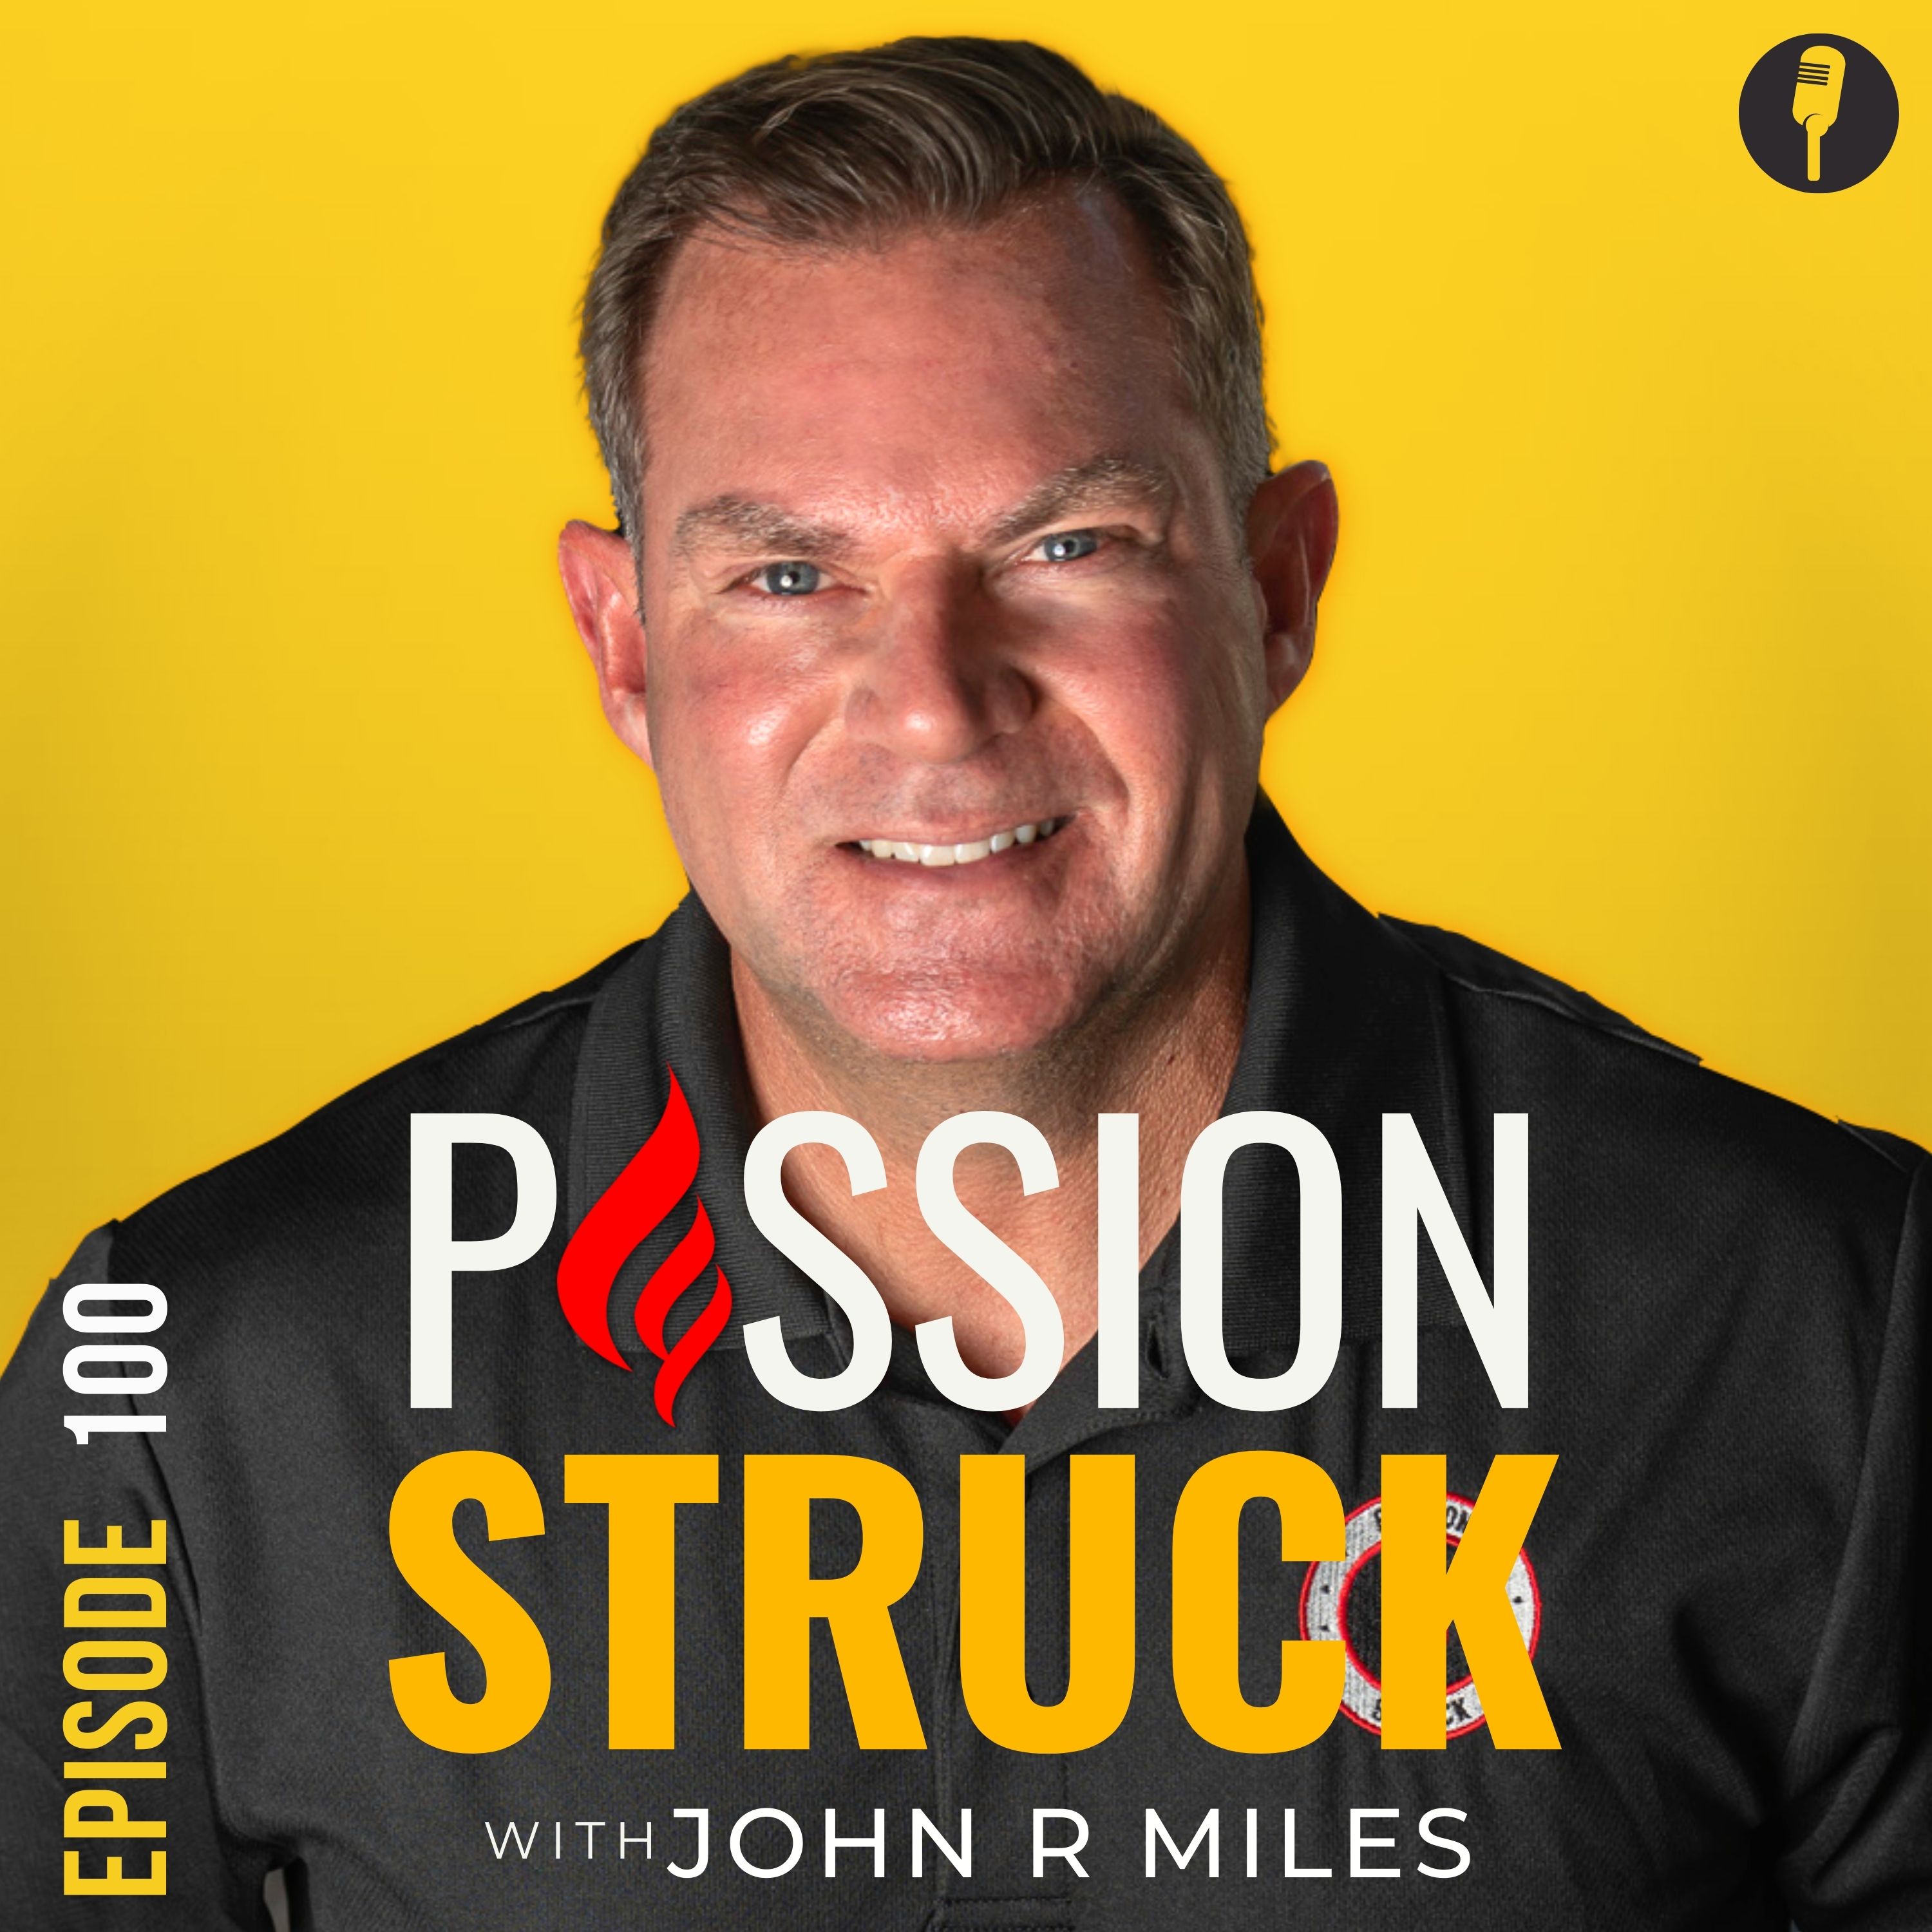 Passion Struck podcast album for Episode 100 with John R. Miles on creating Passion Struck